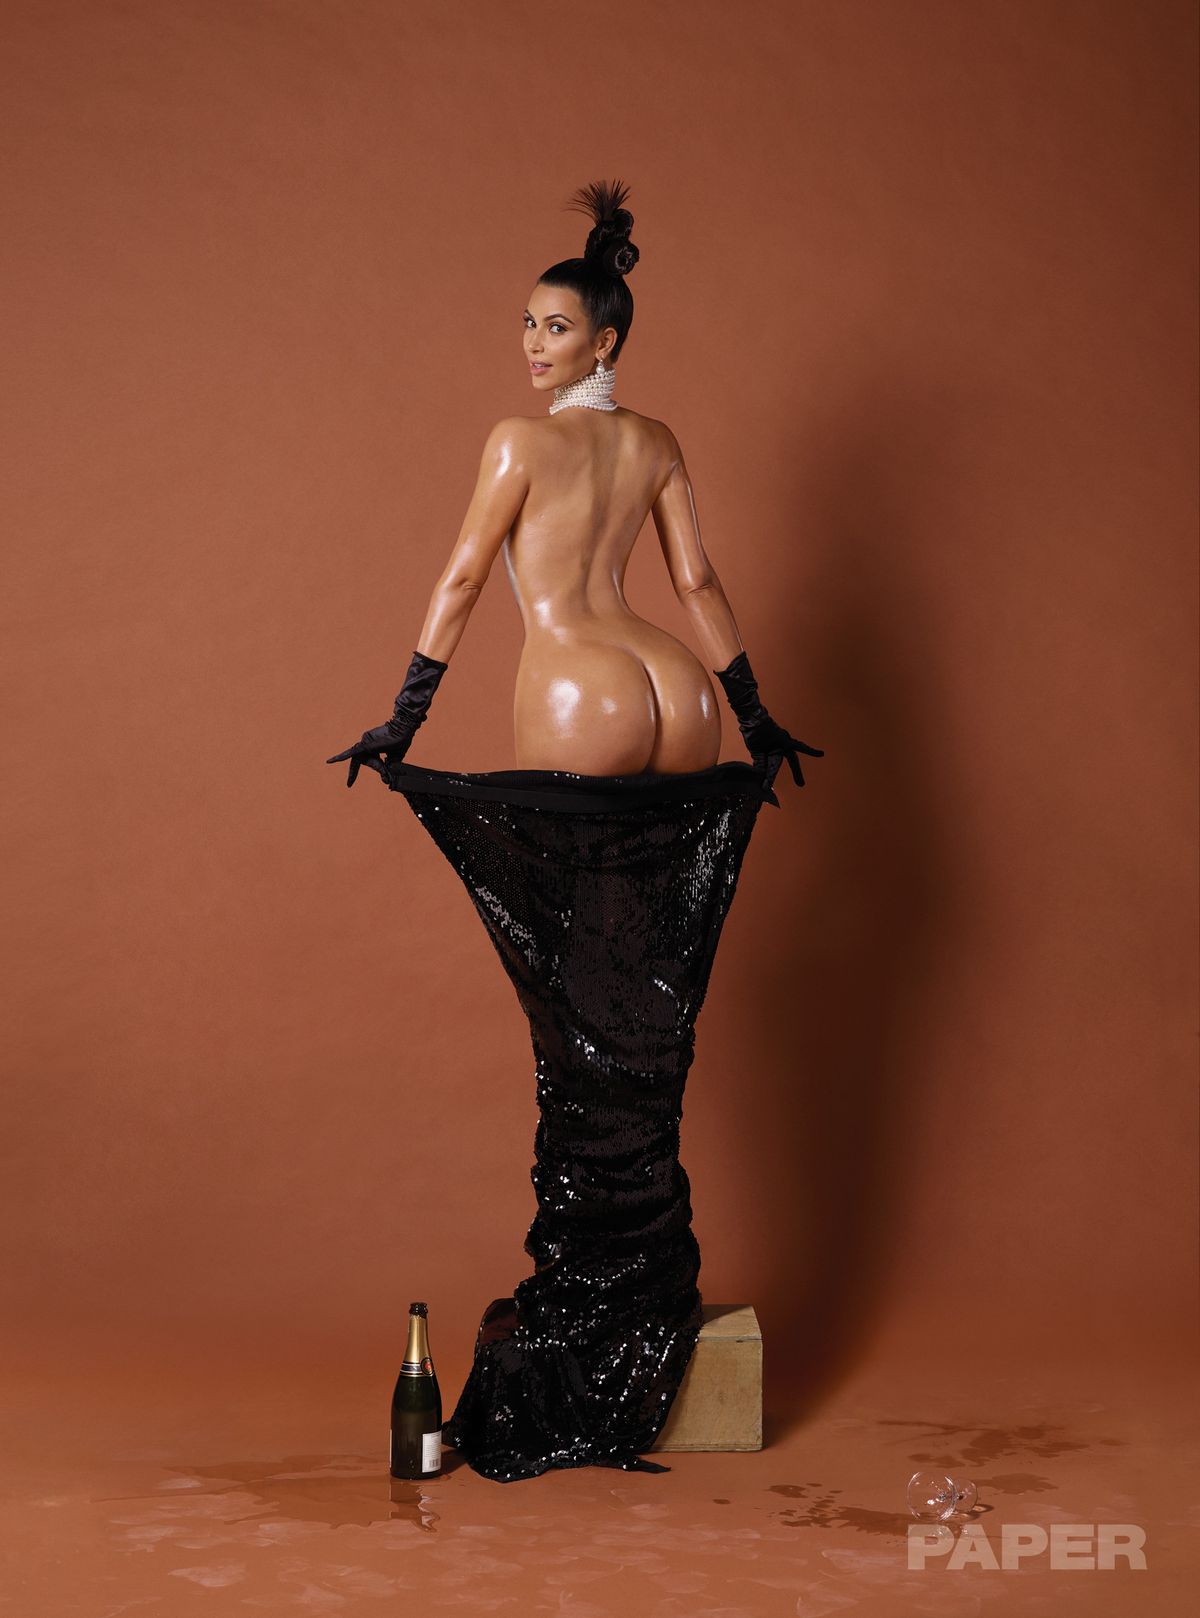 abigail macalino recommends kim k selfie uncensored pic